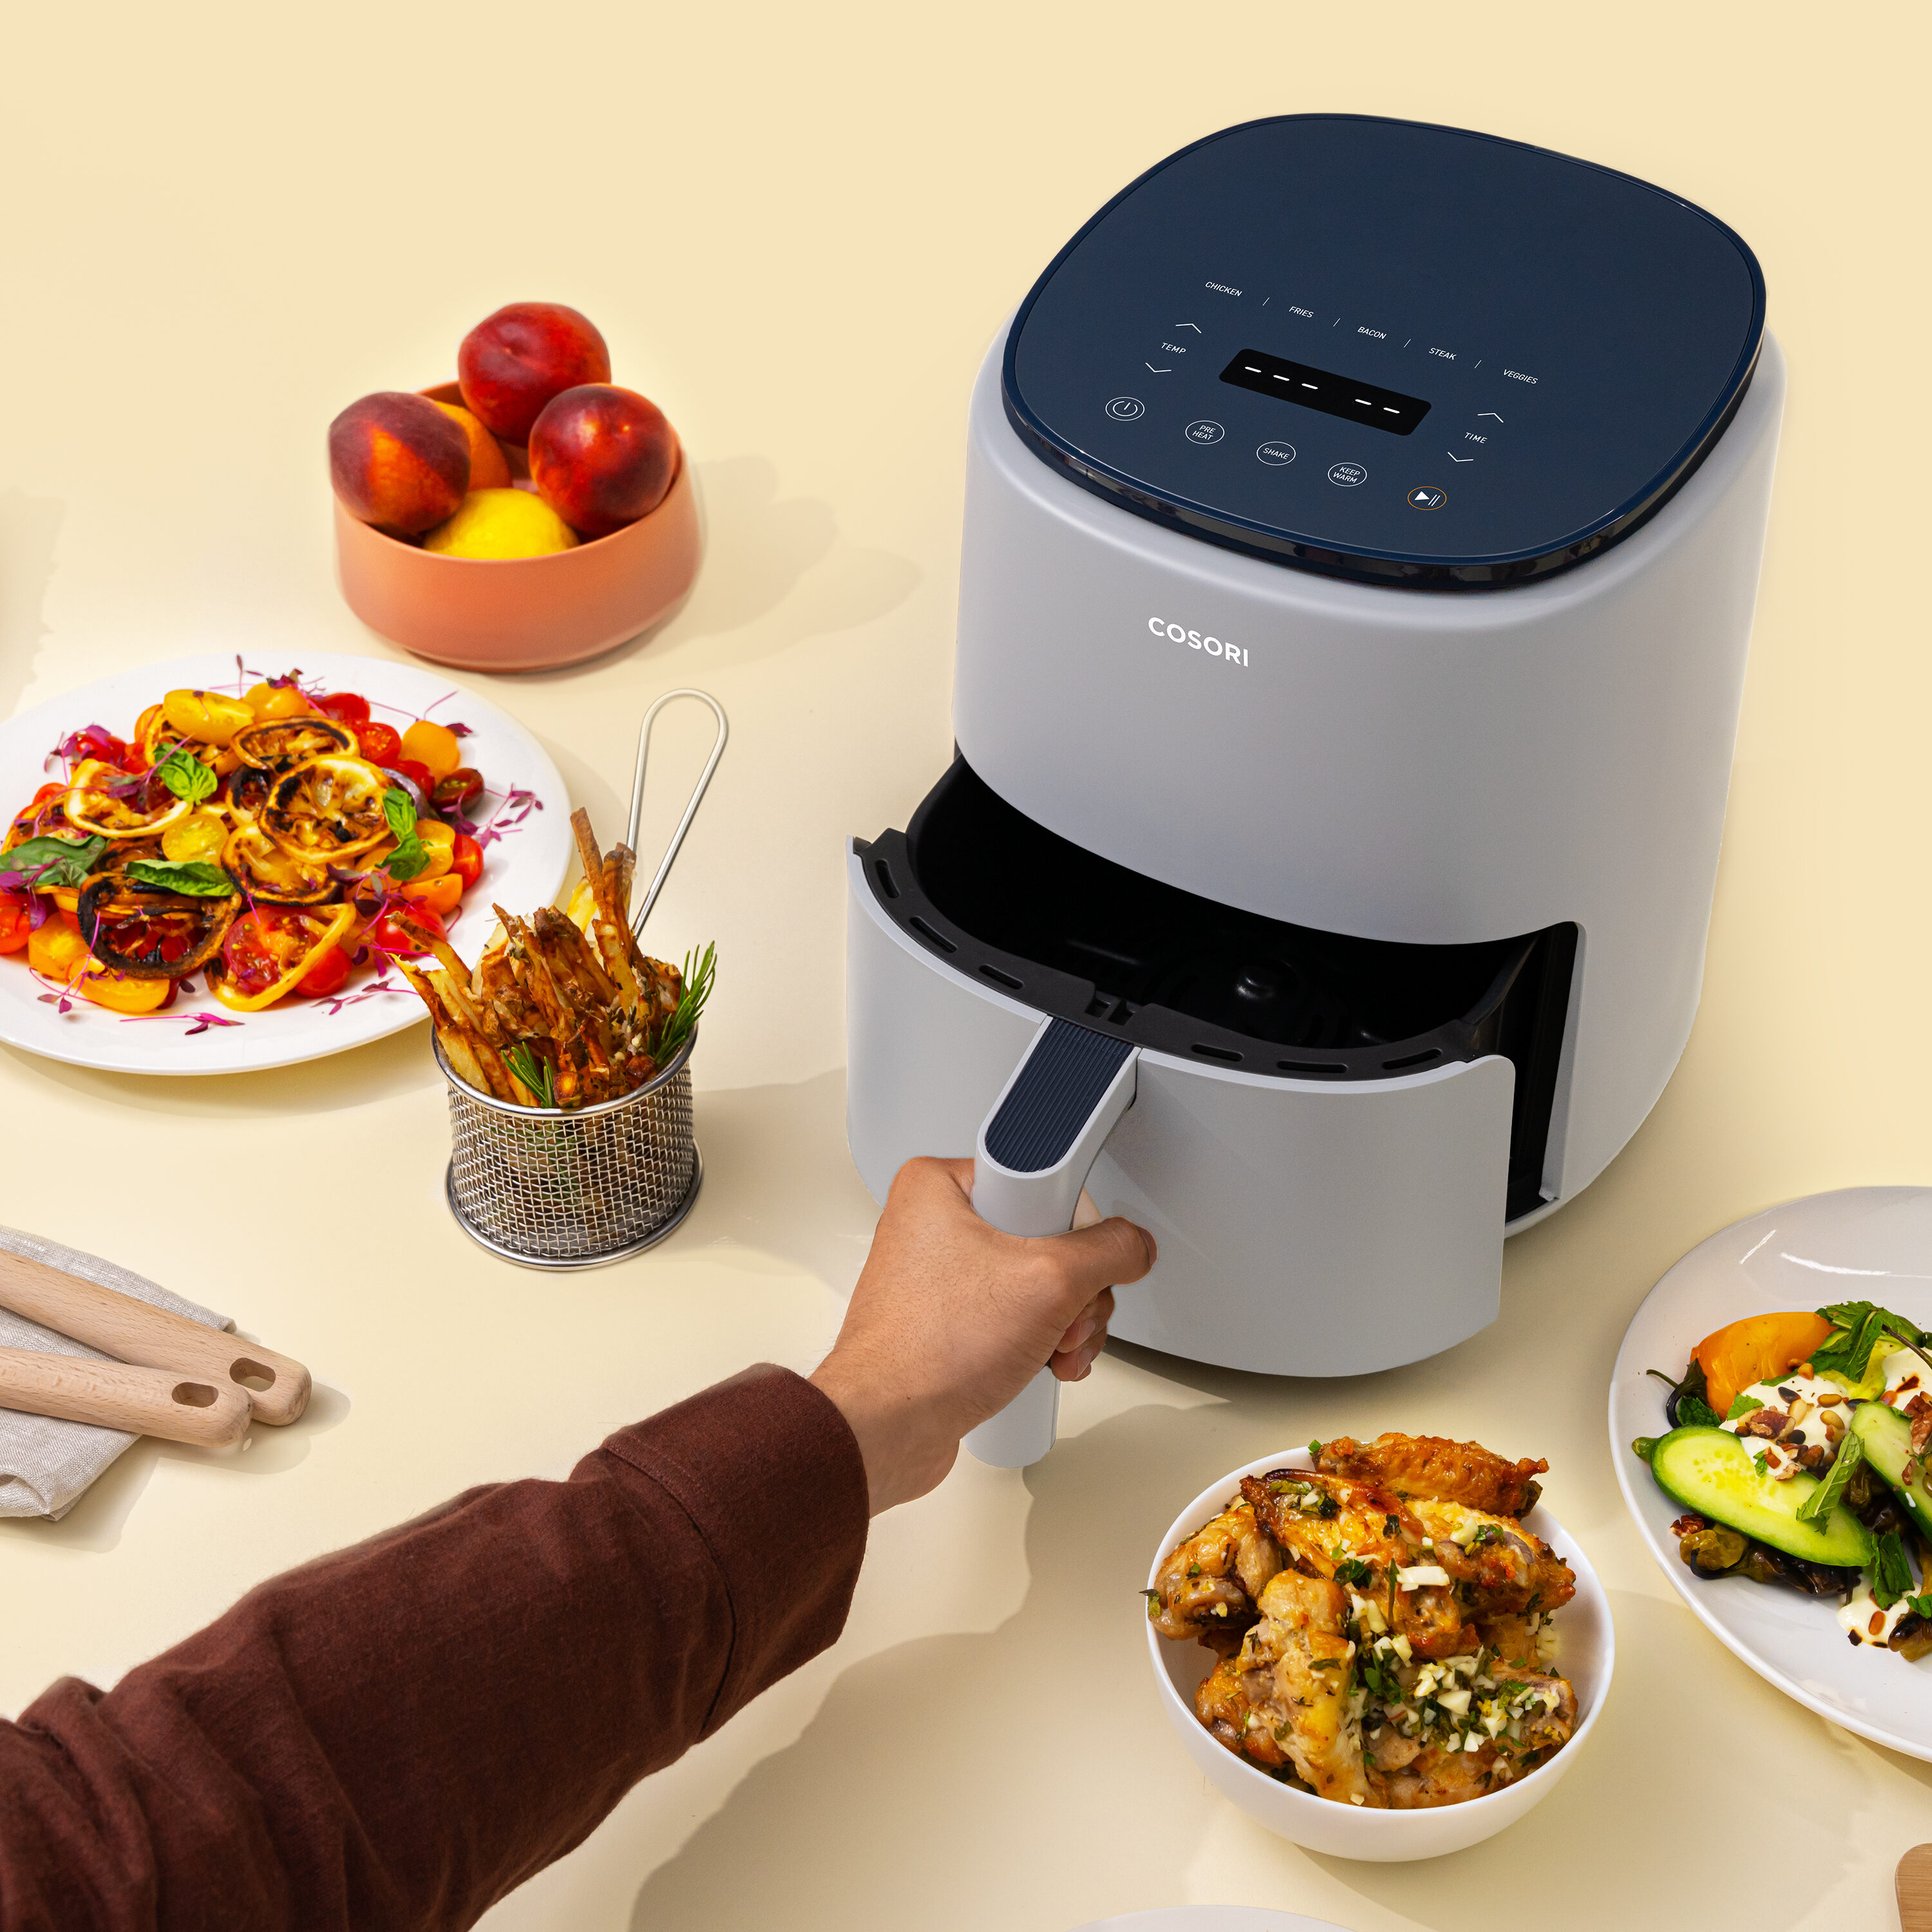 Cosori Gray Air Fryer with App Compatibility, Wi-Fi, and Voice